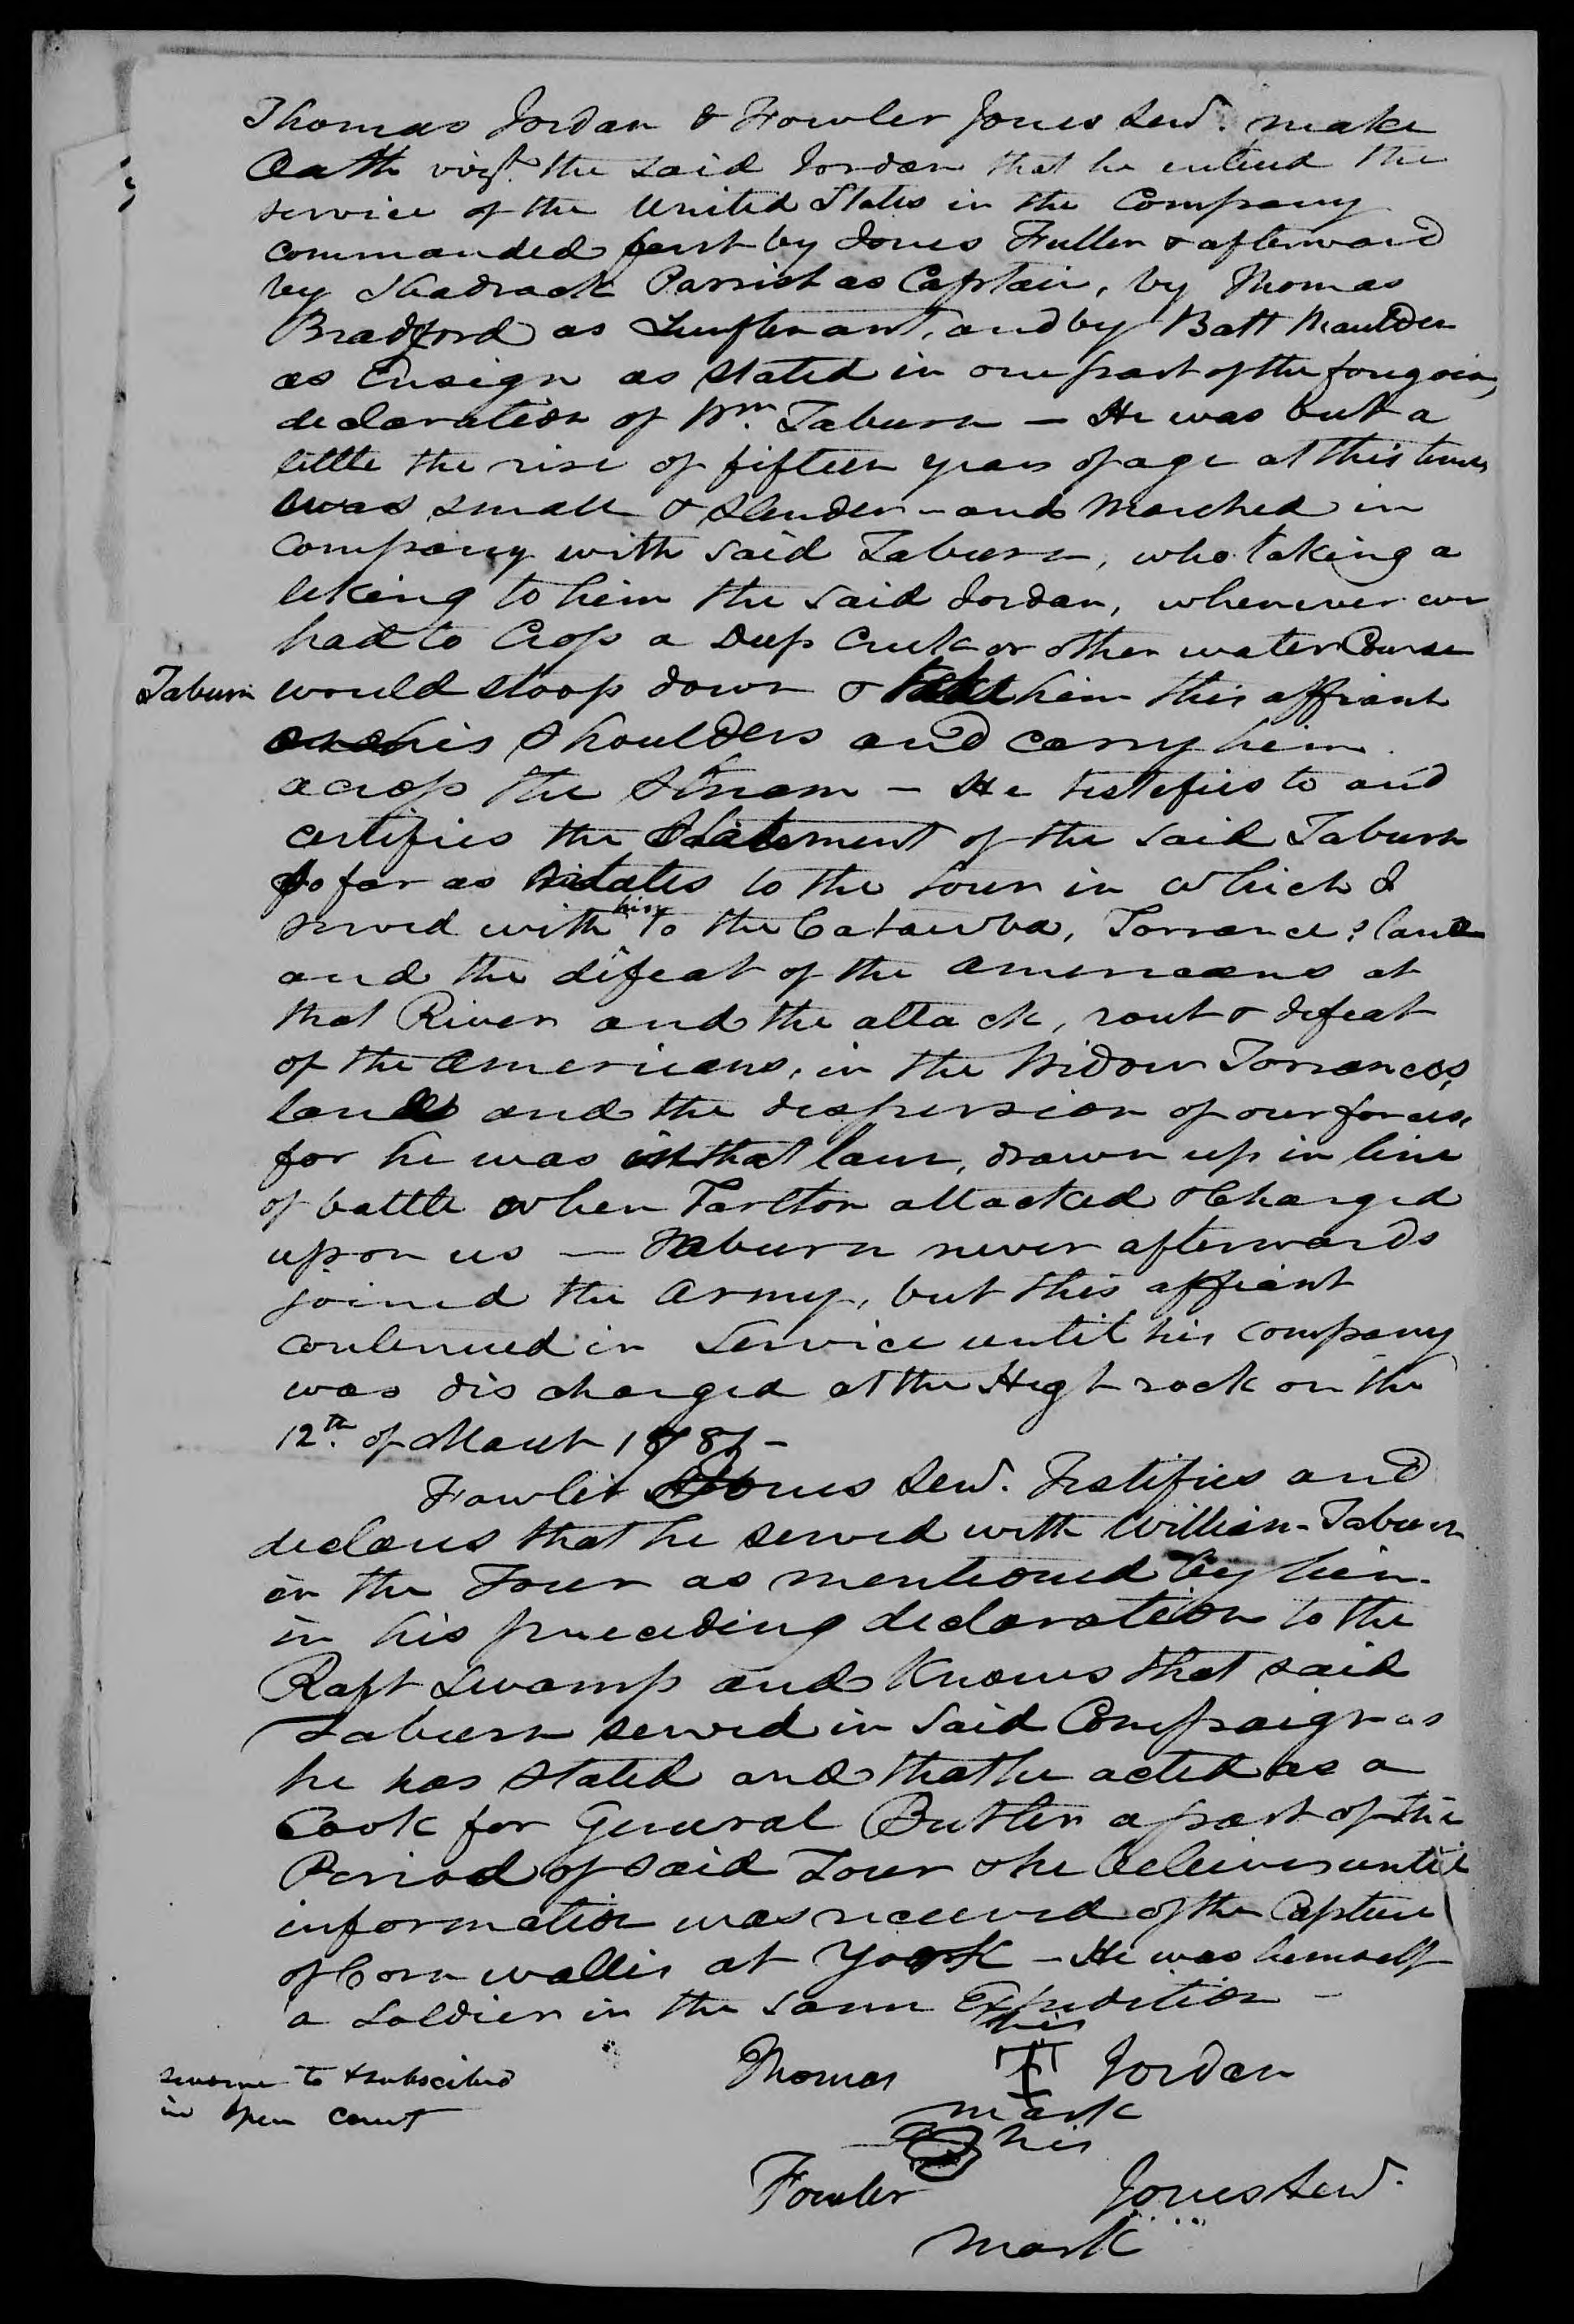 Affidavit of Thomas Jordan and Fowler Jones in support of a Pension Claim for William Taburn, 10 August 1832